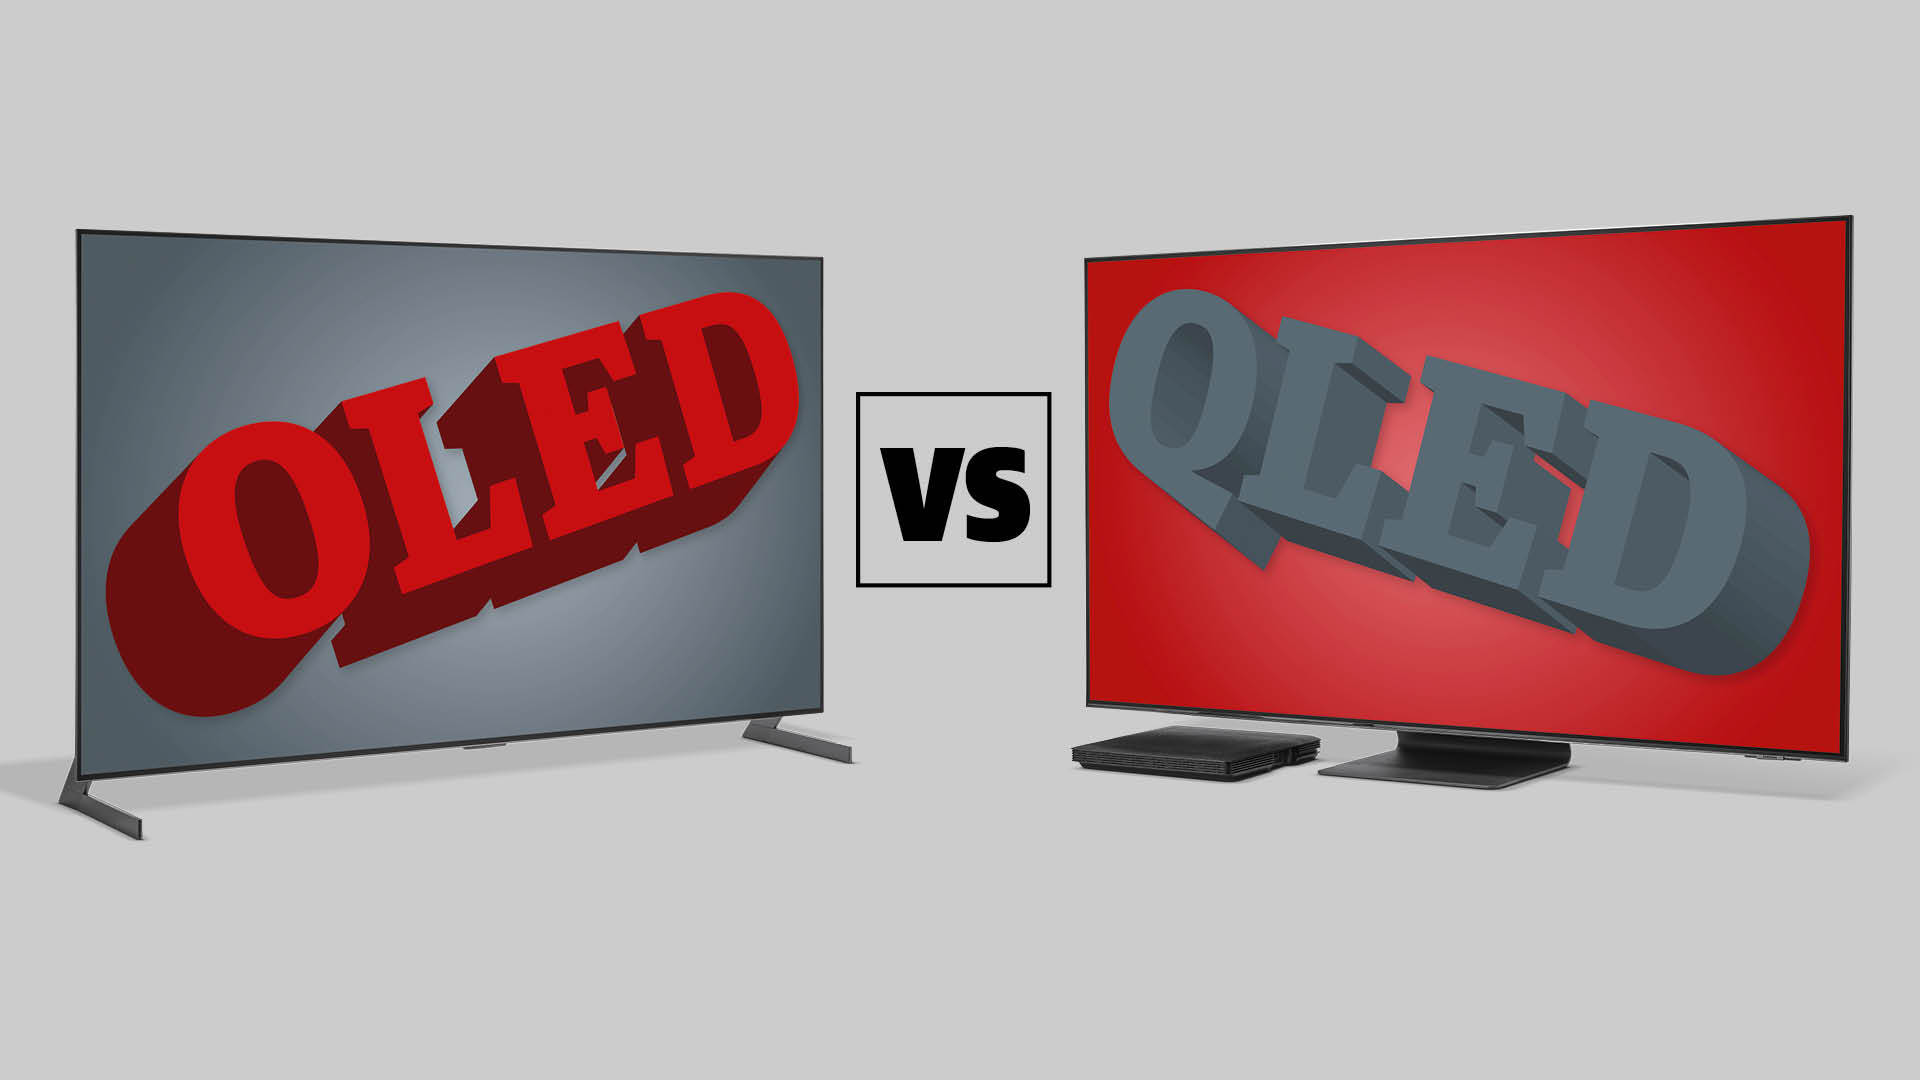 vs QLED: which is the best TV technology? |